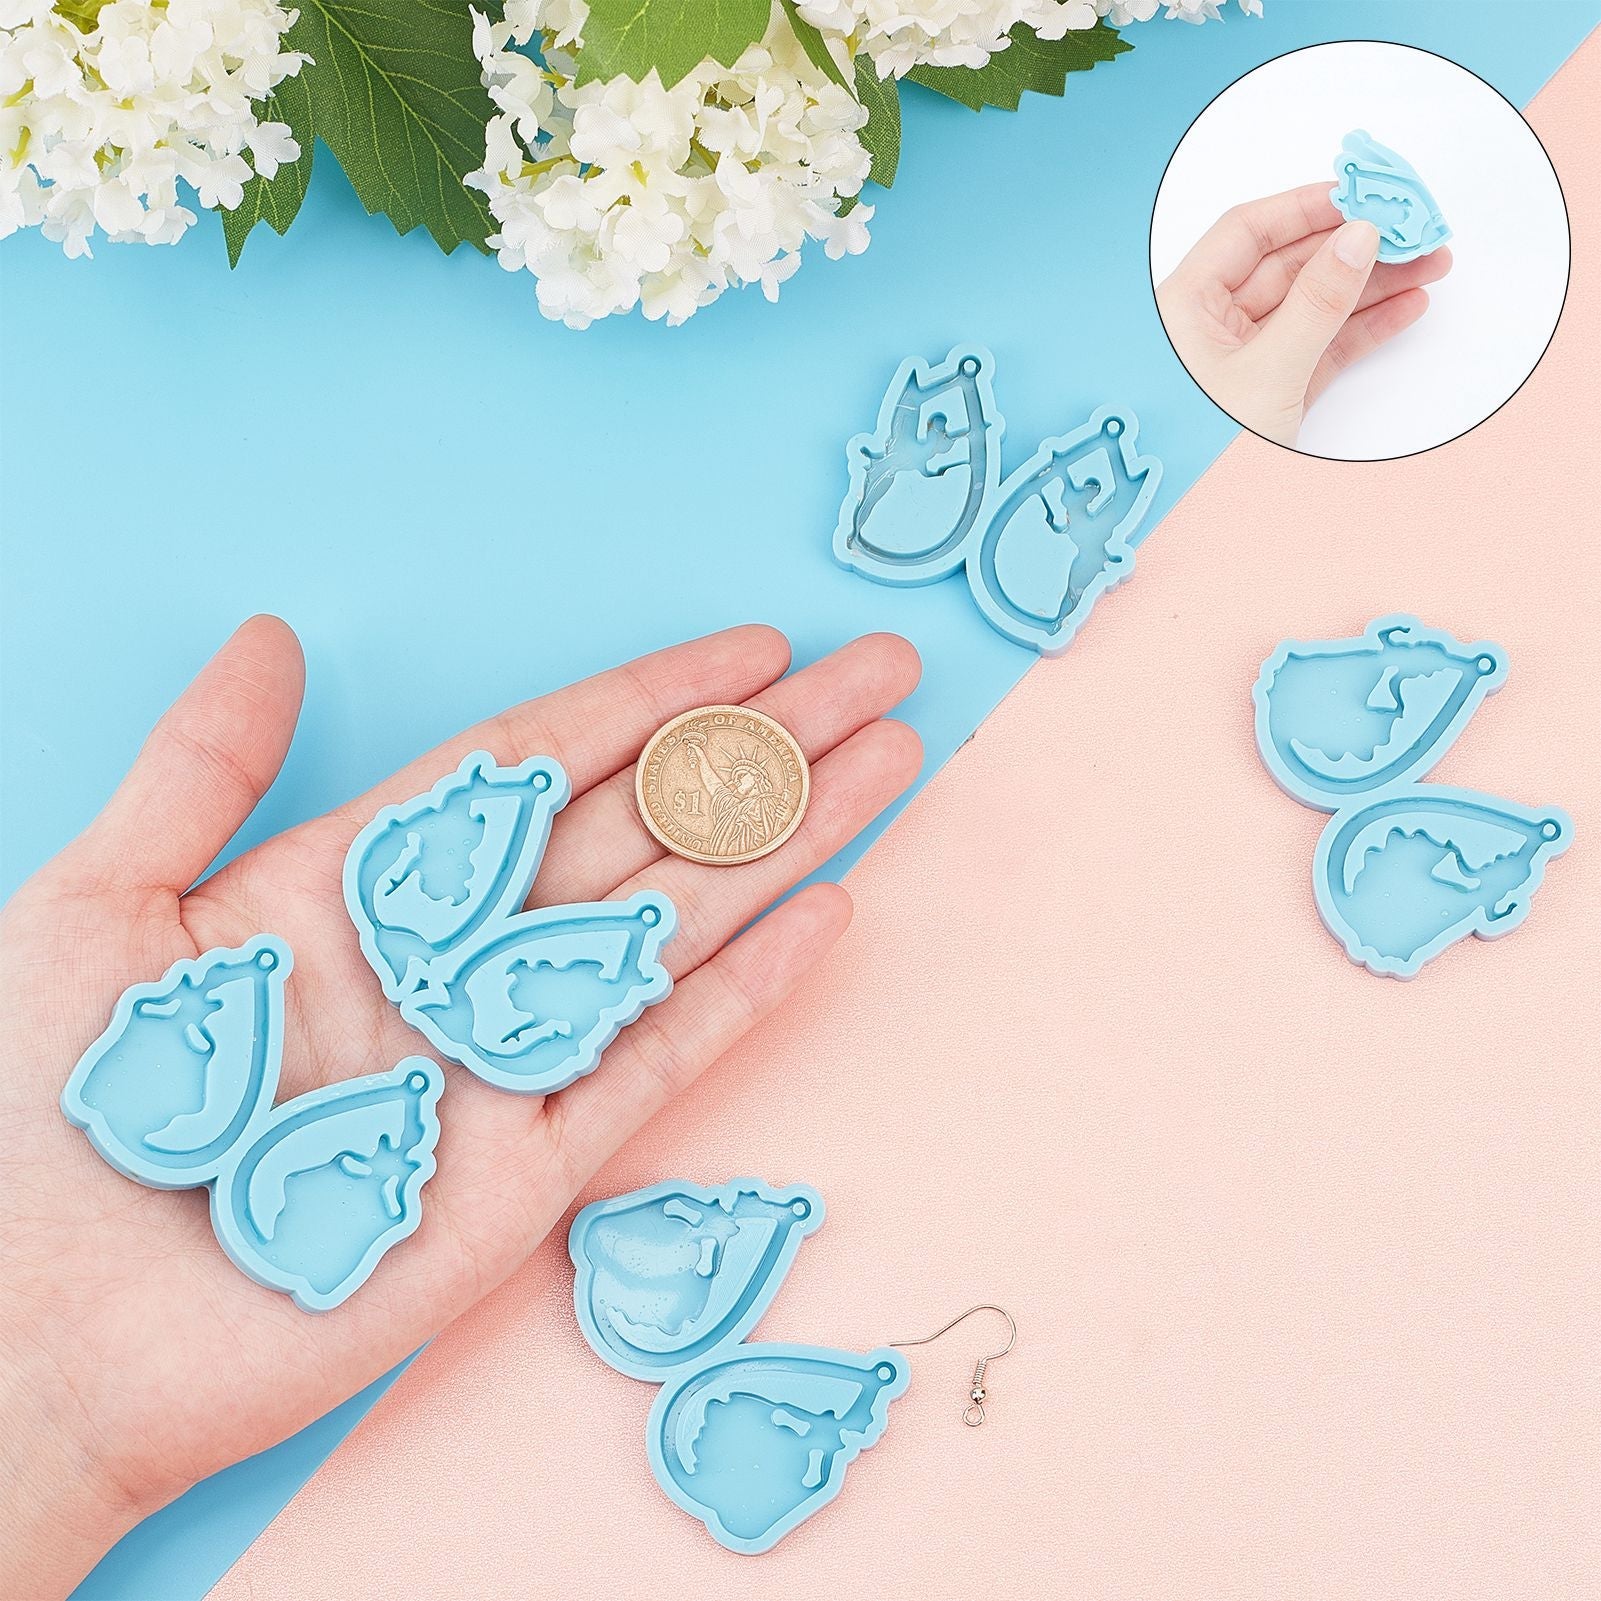 CRASPIRE DIY Heart Shape Earring Silicone Mold Kits, Include Brass